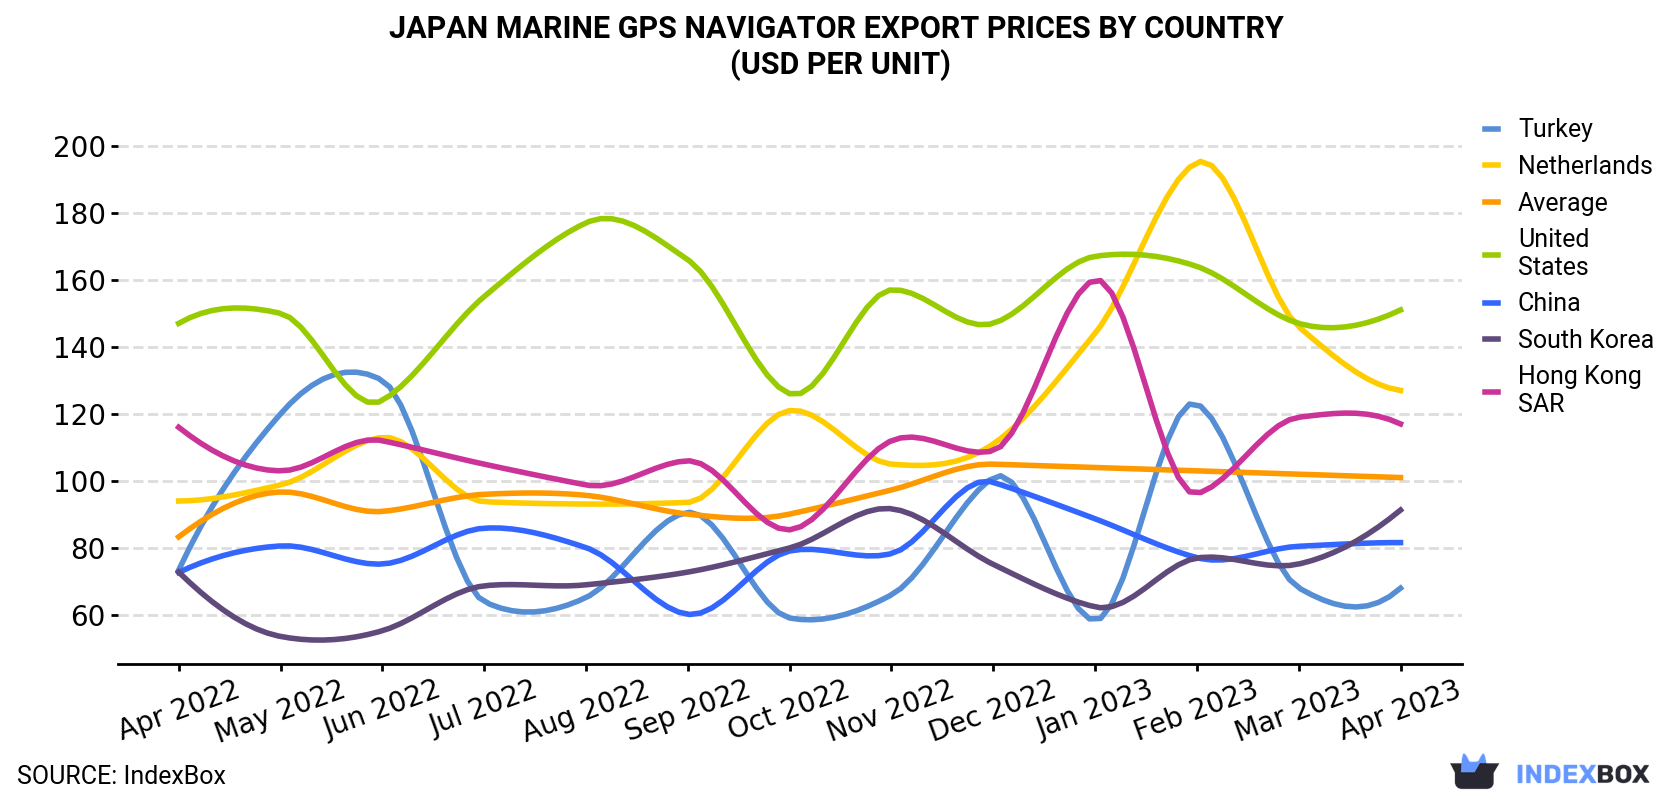 Japan Marine GPS Navigator Export Prices By Country (USD Per Unit)